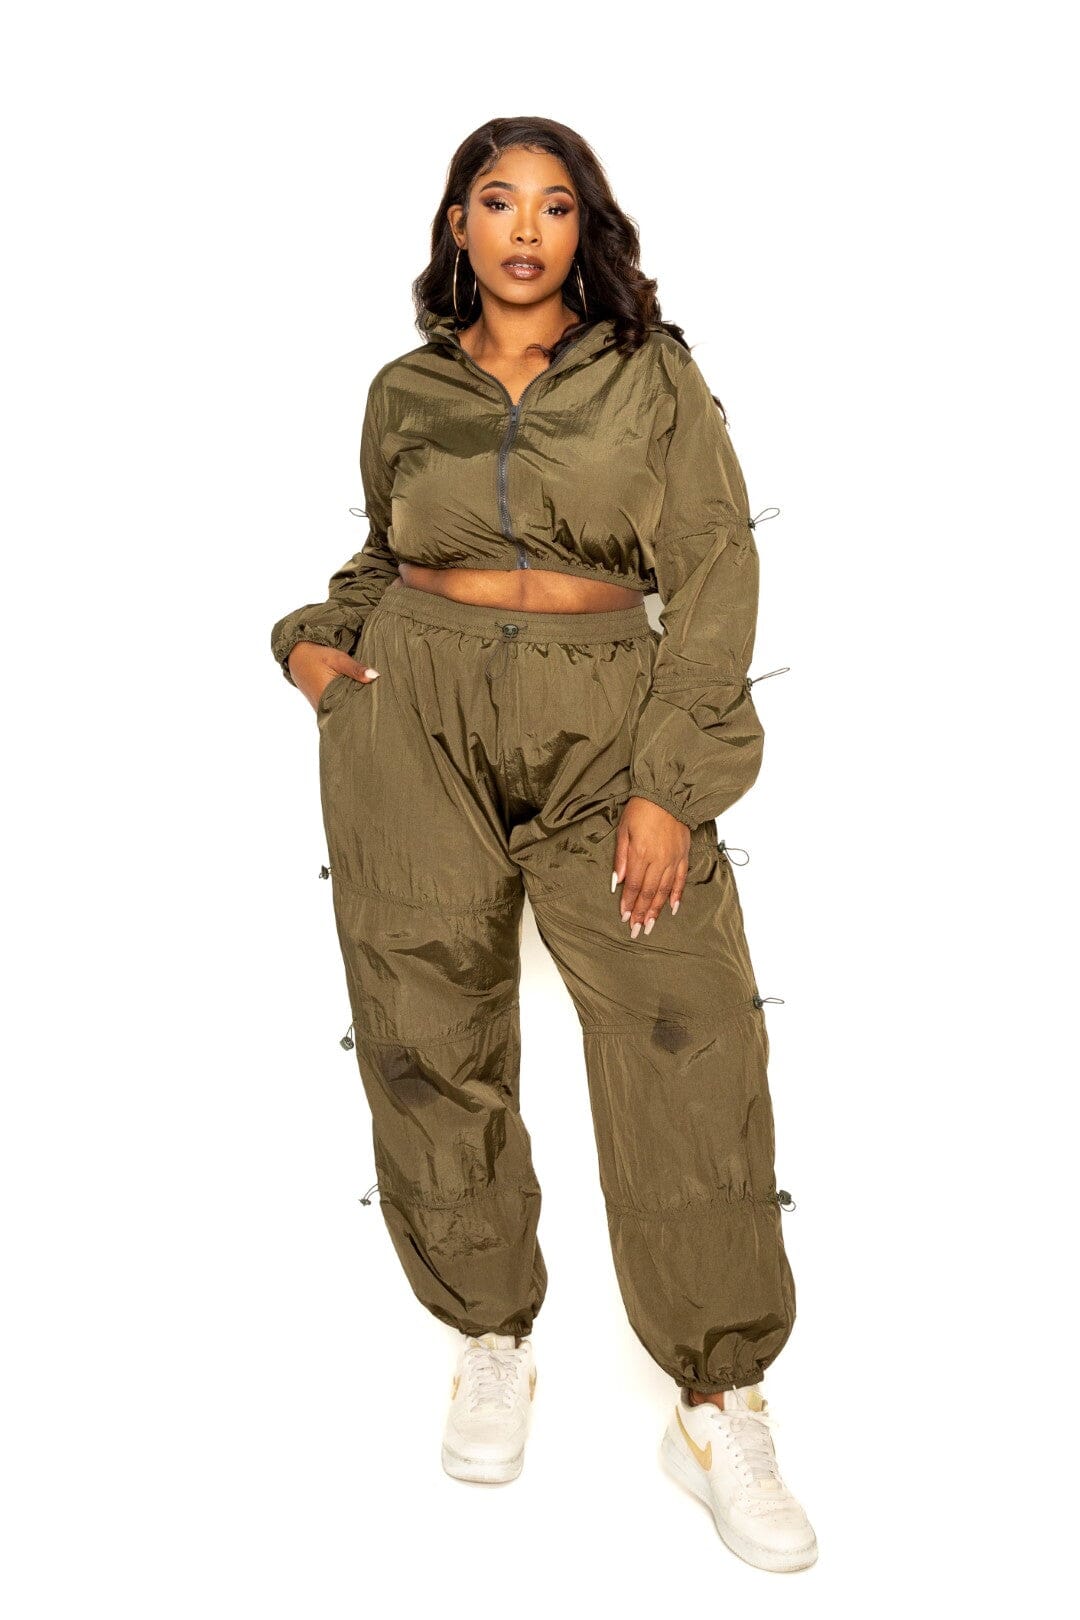 Plus Size 2 piece Olive Green Cord Lock Detail Long Sleeve Zip Up Crop Top and pant activewear Set jehouze 